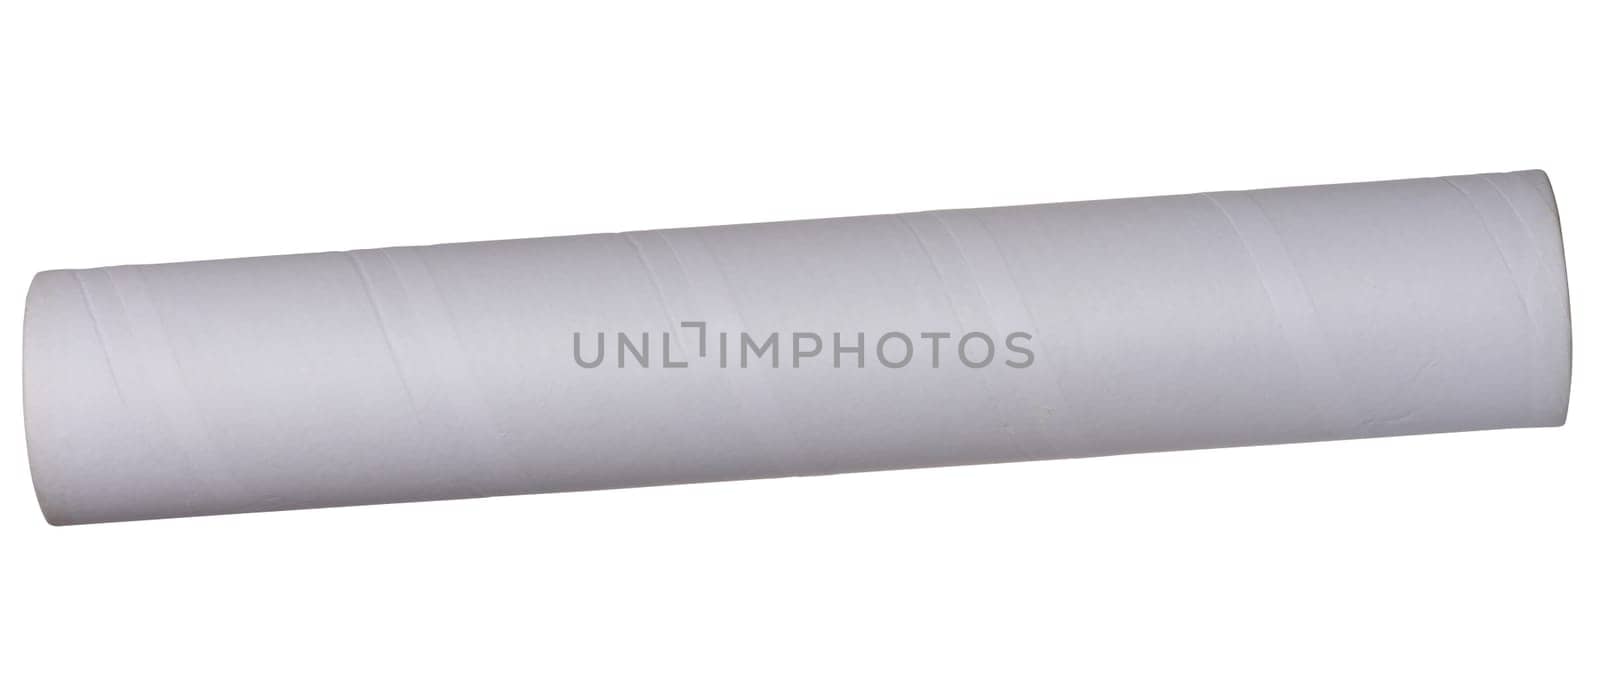 White paper towel tube on white isolated background, top view